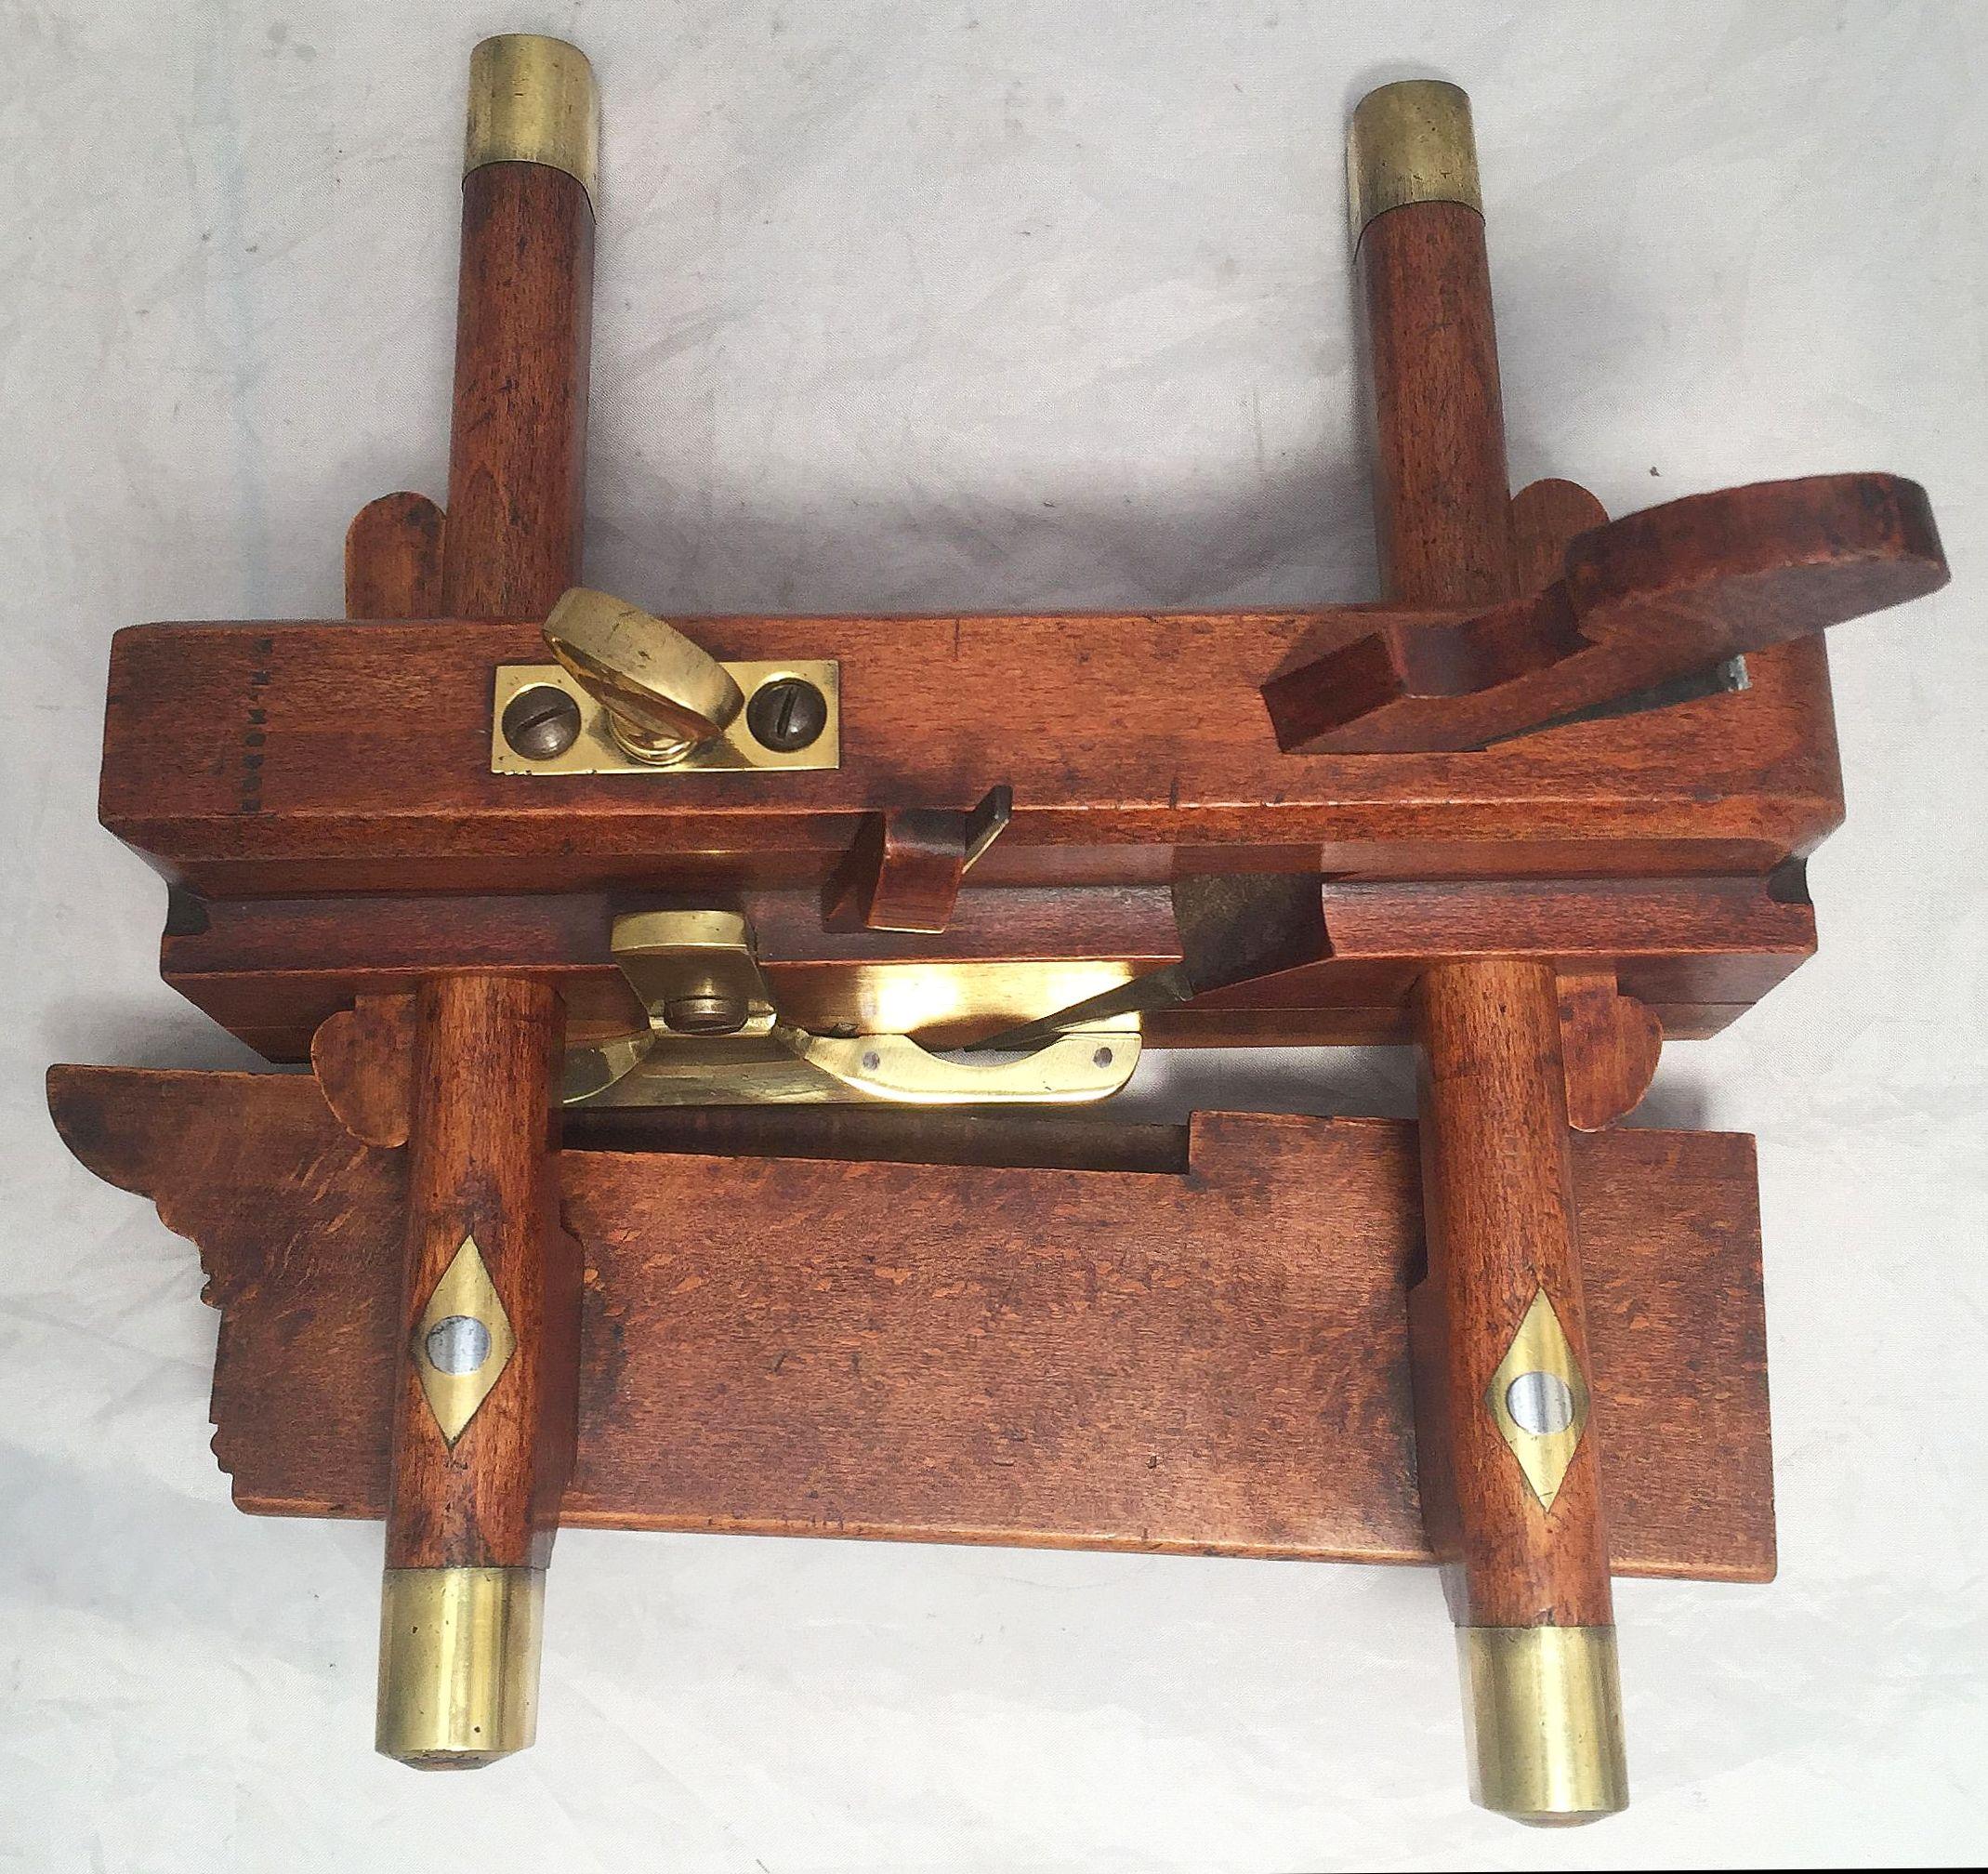 Early 20th Century English Shipwright's or Carpenter's Sash Fillister Plane by Atkin and Sons For Sale